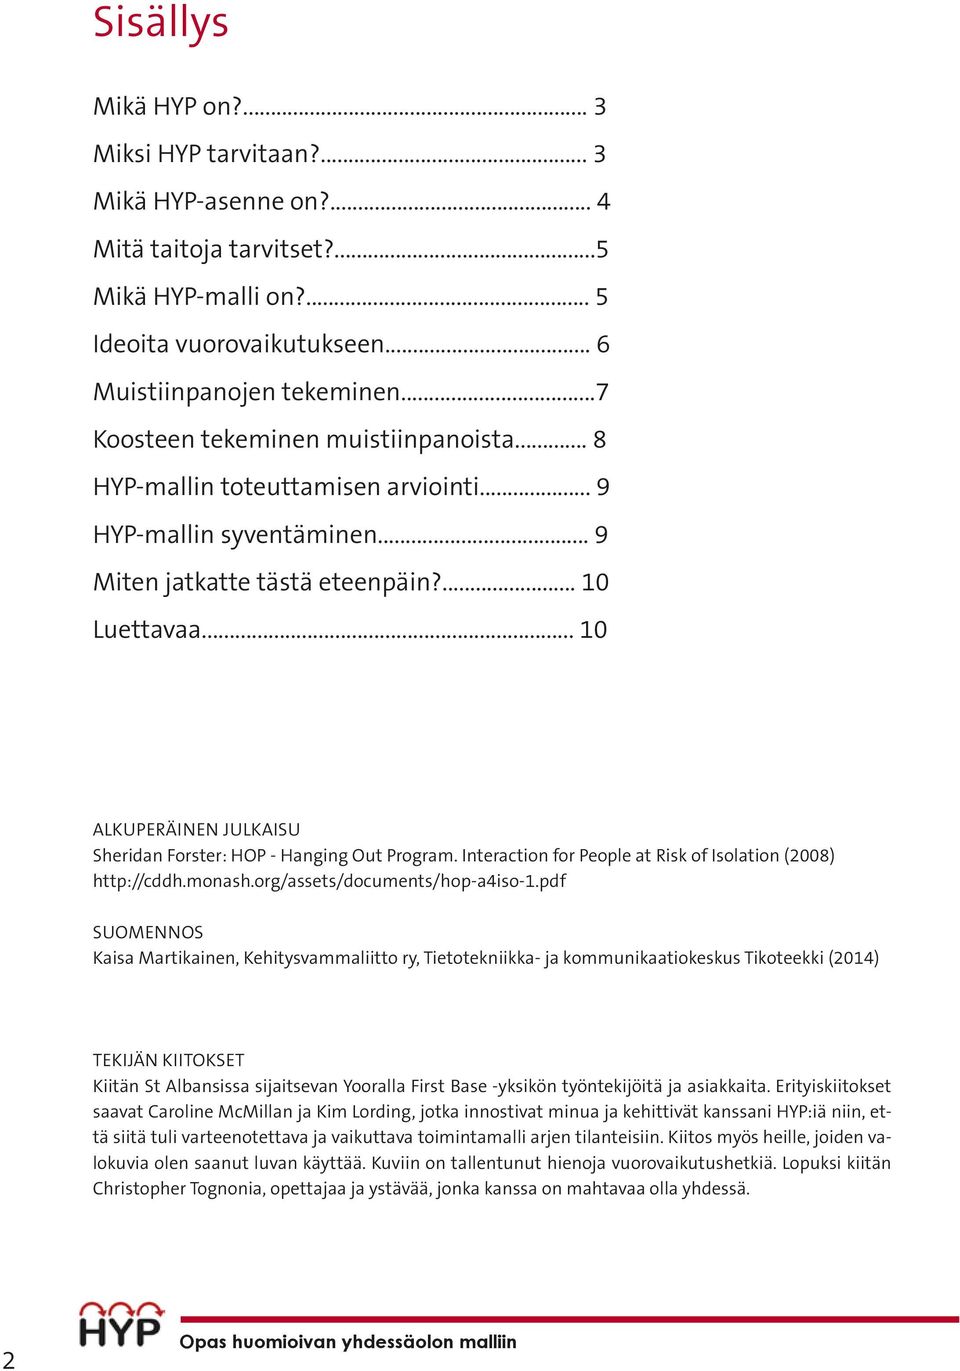 .. 10 Alkuperäinen julkaisu Sheridan Forster: HOP - Hanging Out Program. Interaction for People at Risk of Isolation (2008) http://cddh.monash.org/assets/documents/hop-a4iso-1.